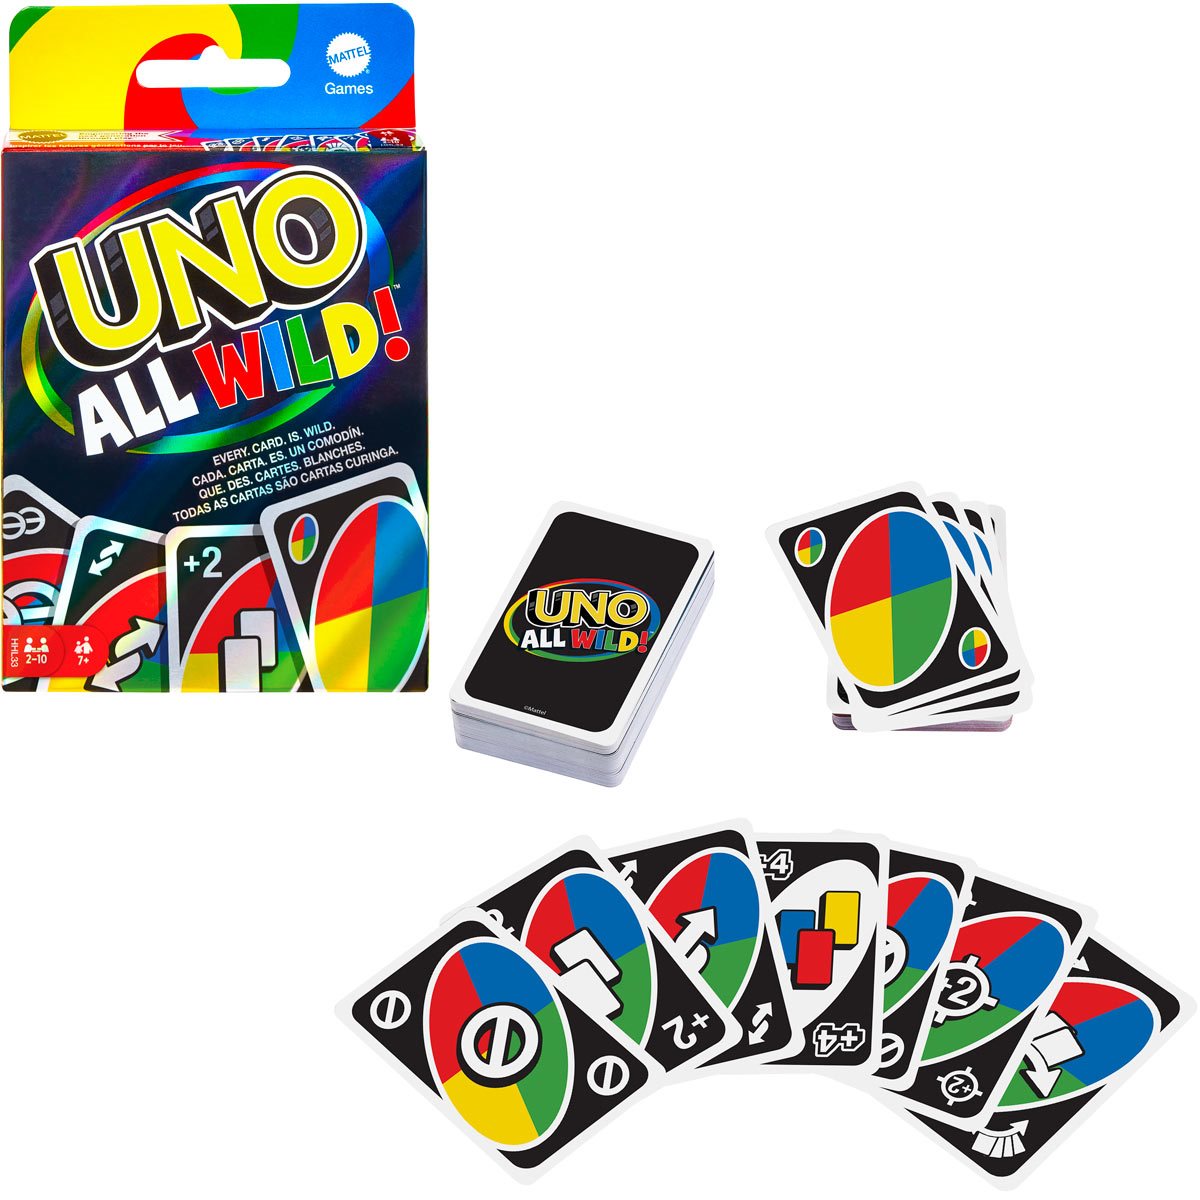 Giant Uno Card Game in 2023  Uno card game, Card games, Action cards